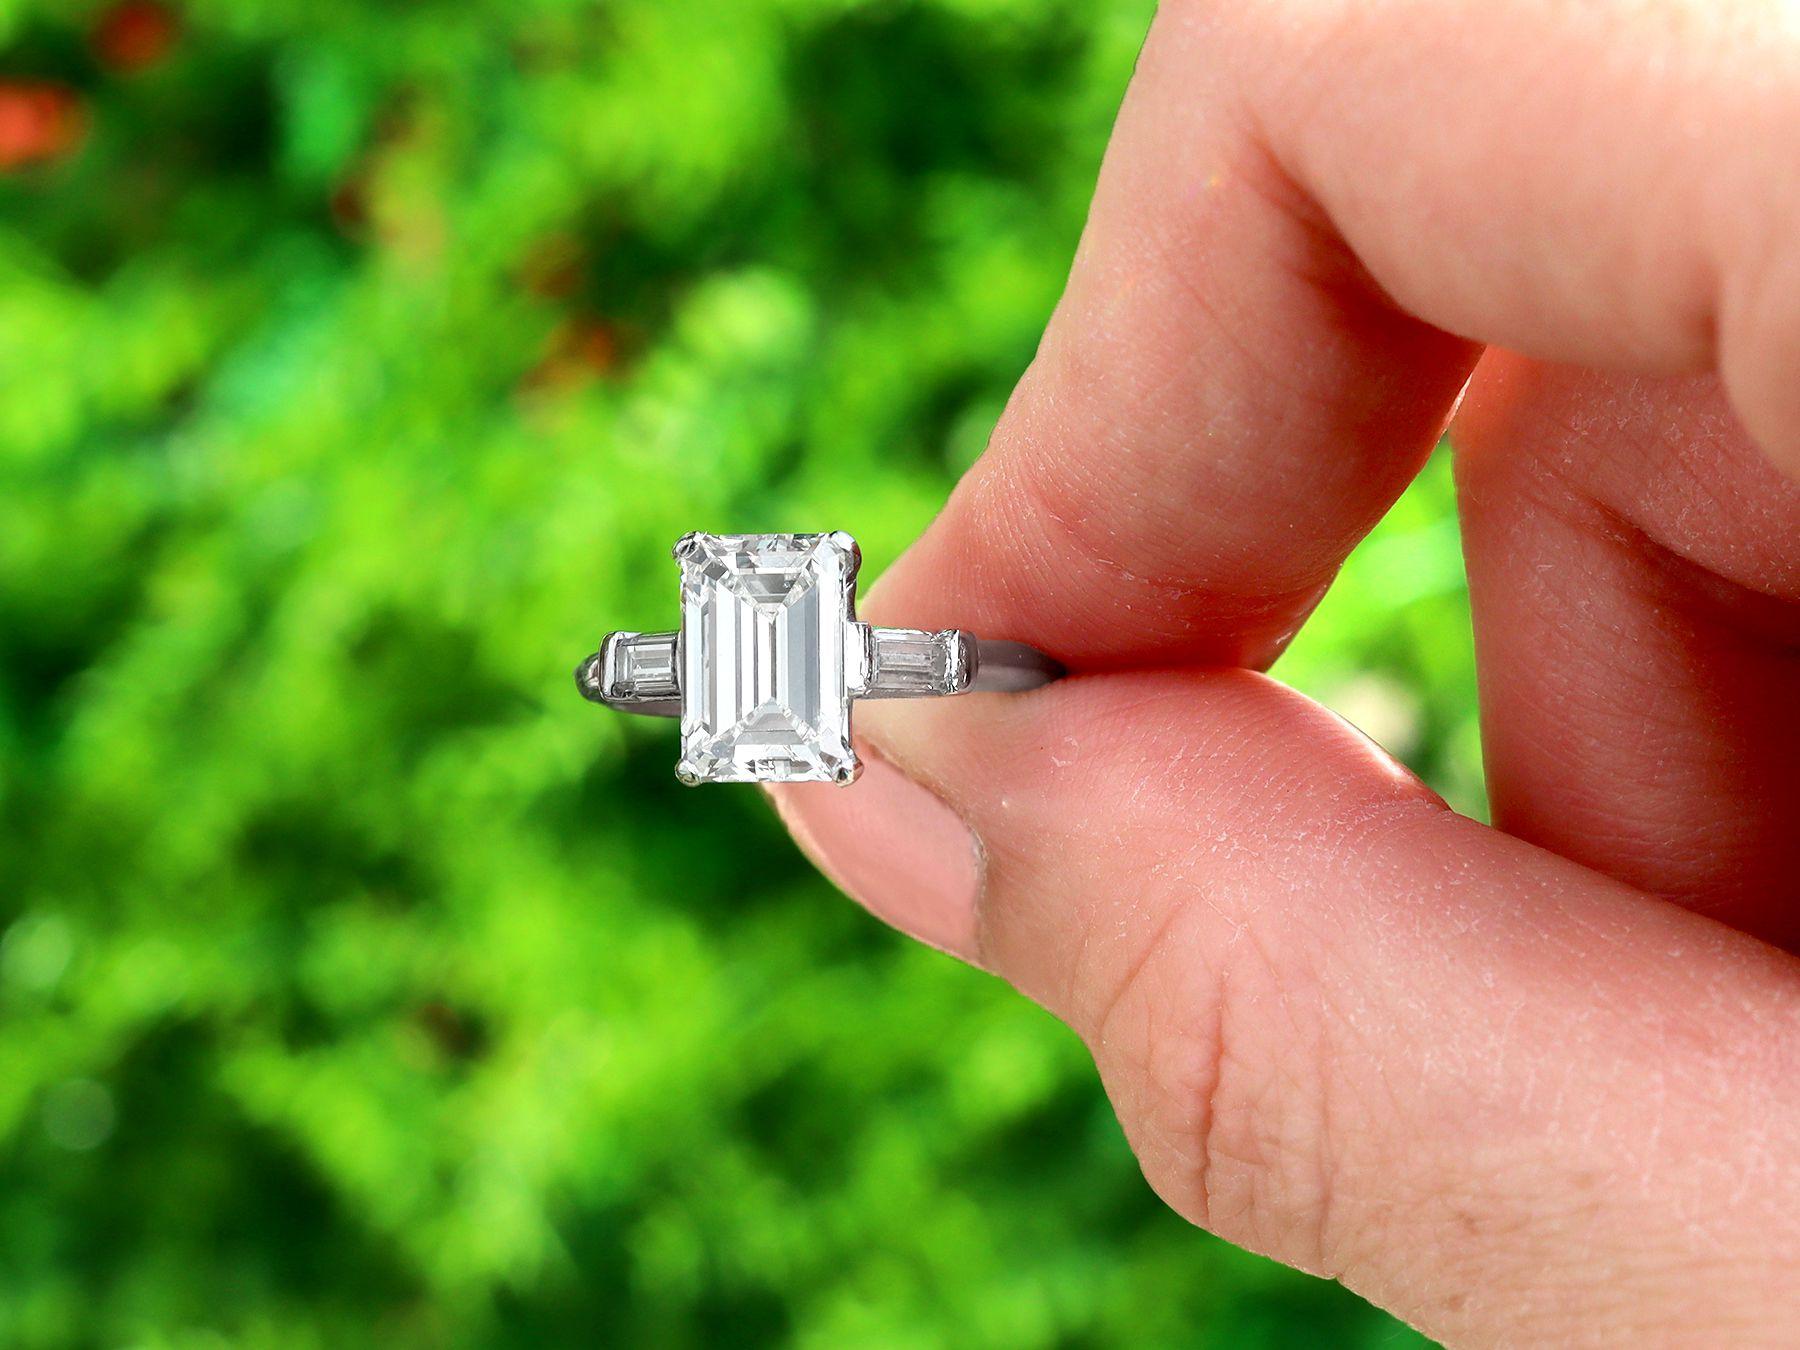 A stunning, fine and impressive antique 2.38 carat emerald cut diamond solitaire ring in platinum; part of our antique engagement ring collections

This stunning, fine and impressive antique diamond ring has been crafted in platinum.

The pierced